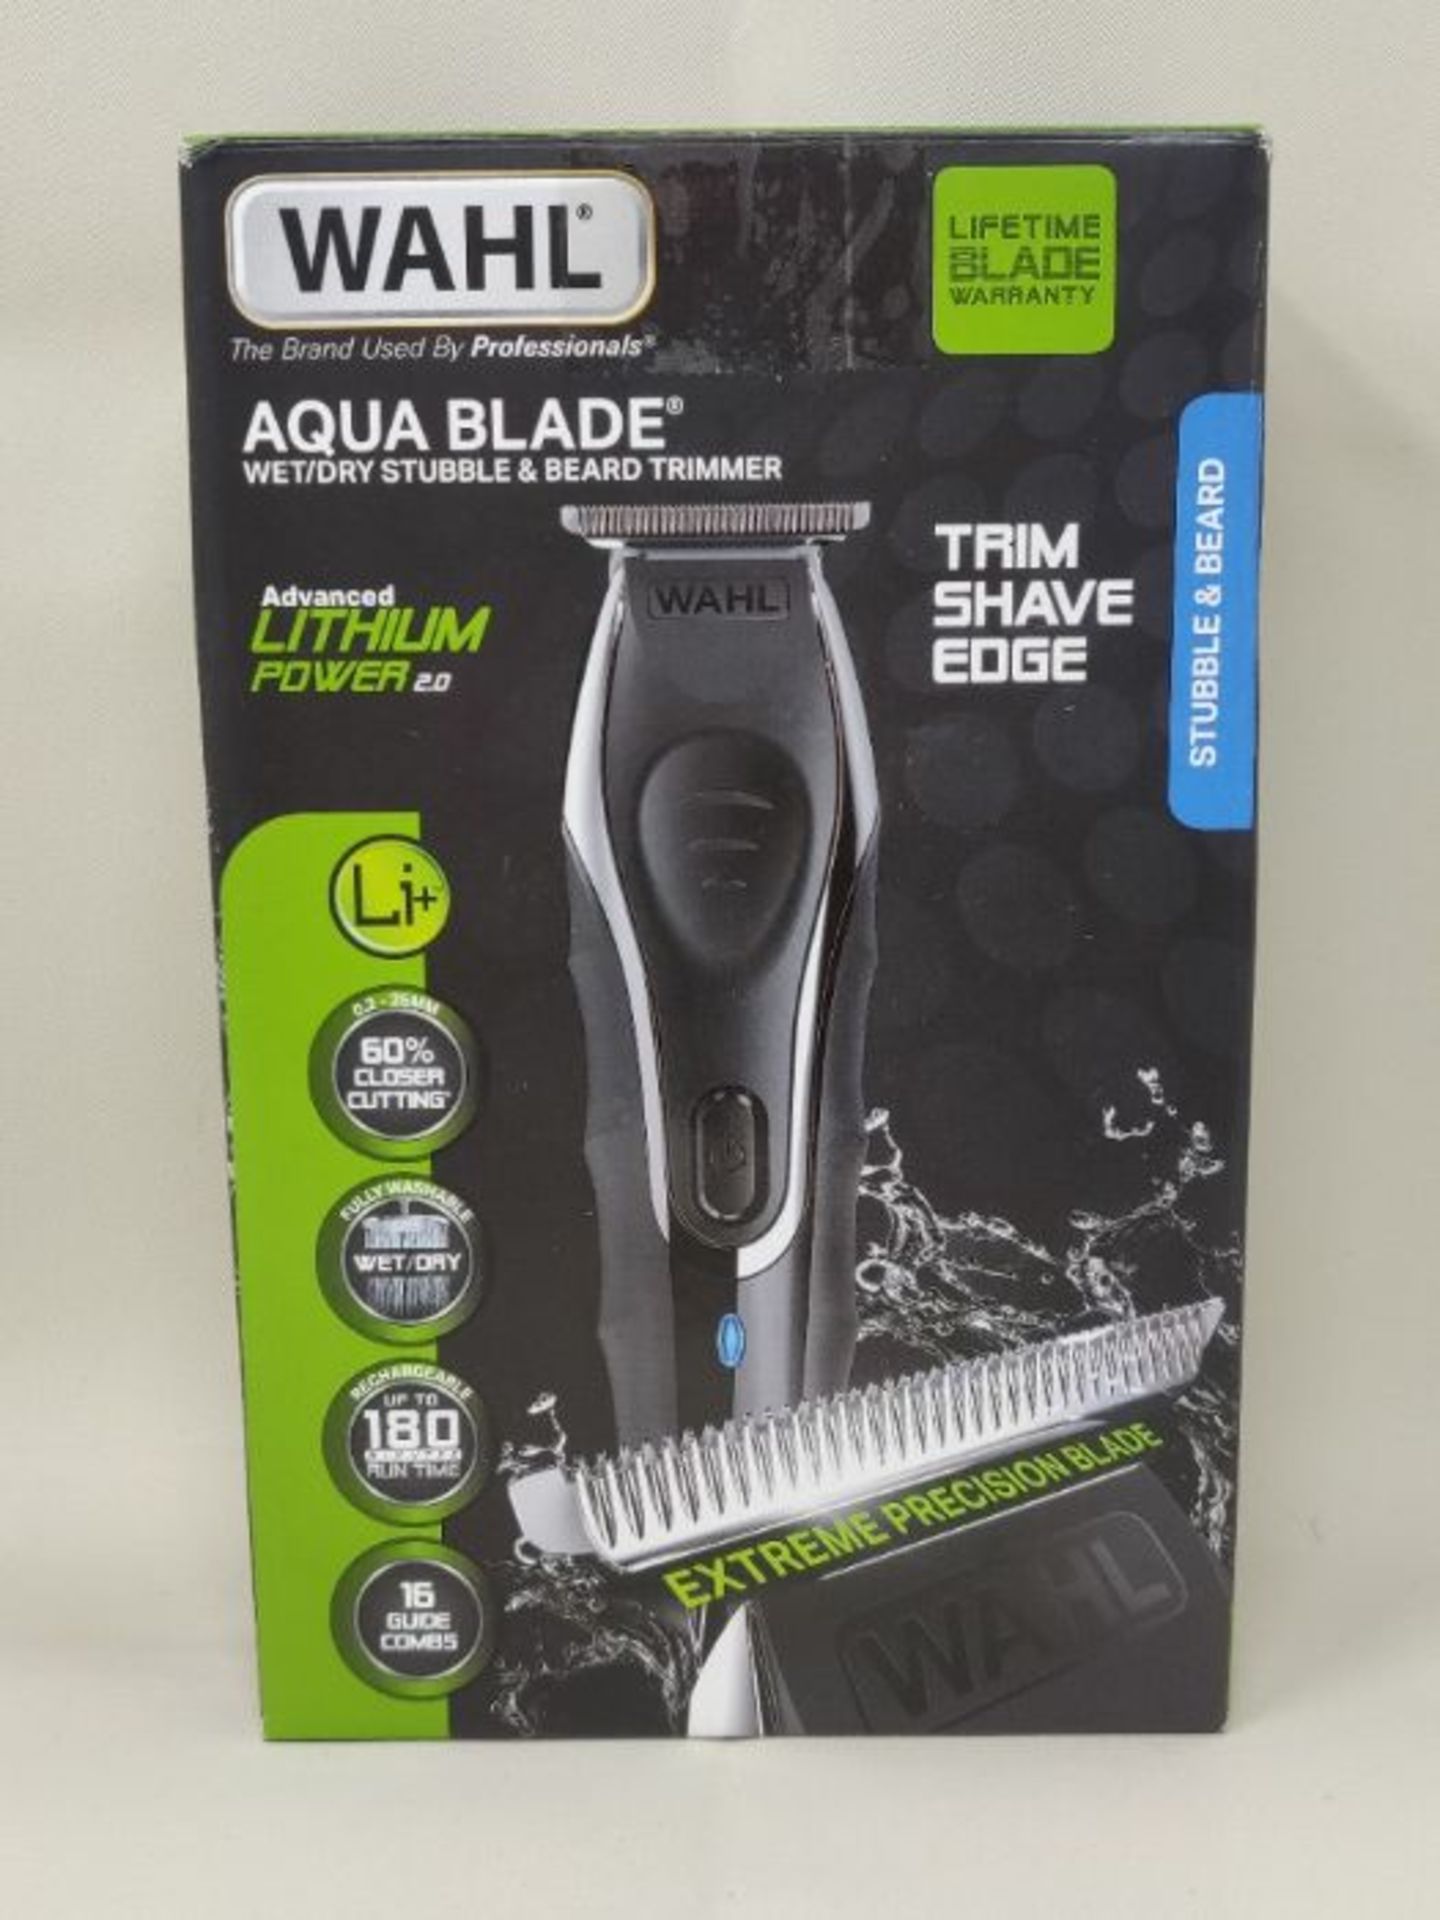 WAHL Beard Trimmer Men, Aqua Blade Hair Trimmers for Men, Stubble Trimmer, Male Groomi - Image 2 of 3